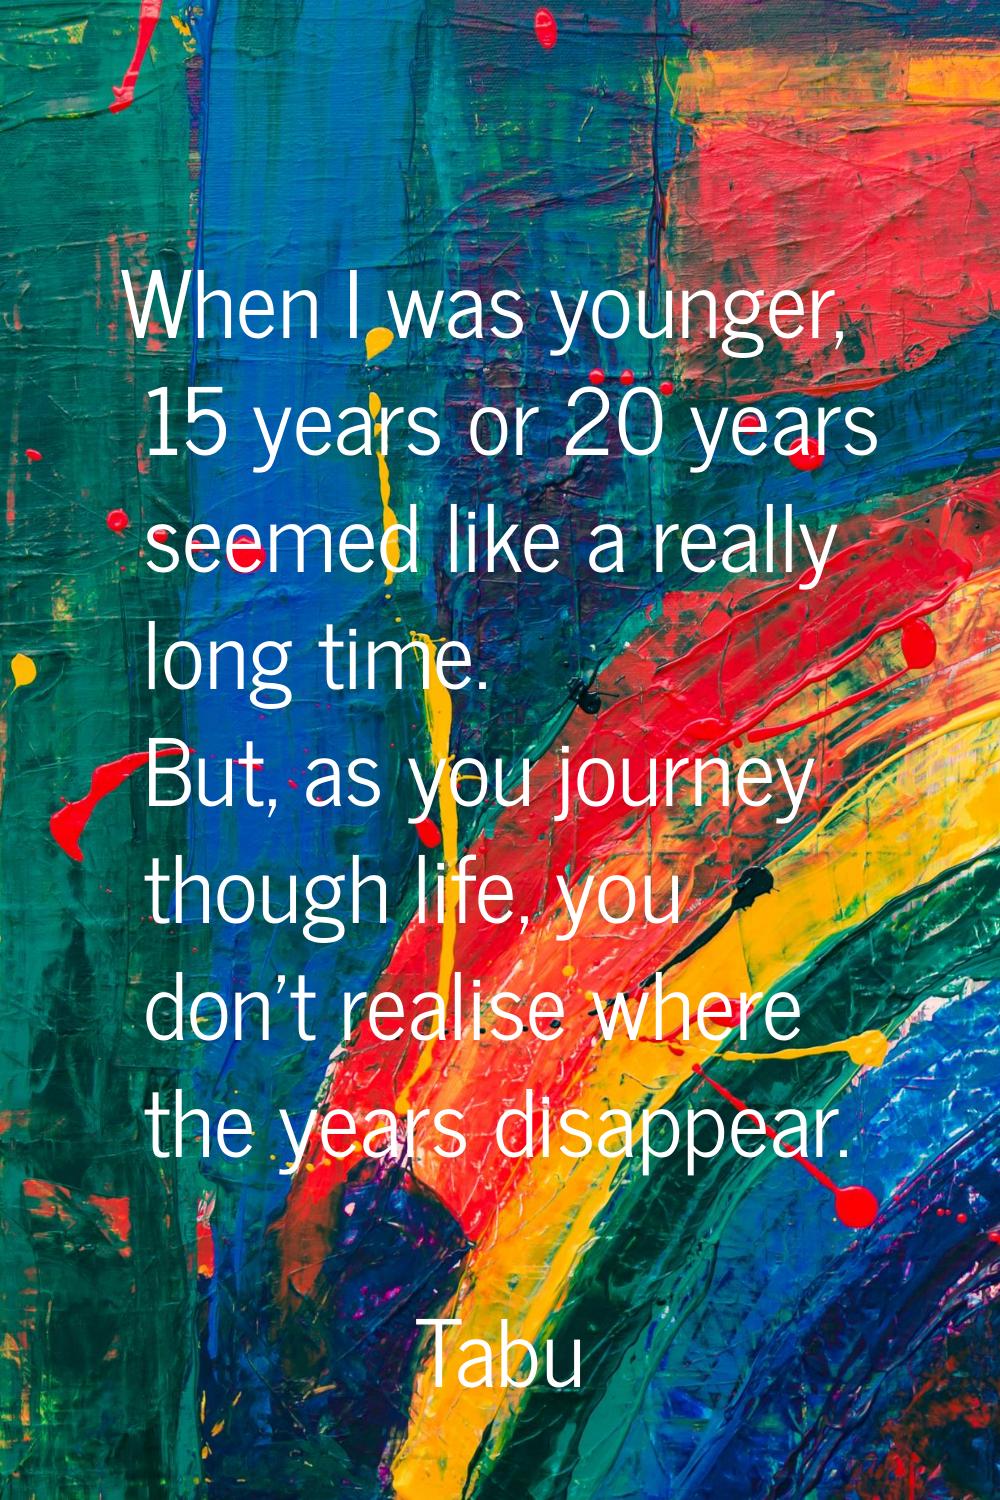 When I was younger, 15 years or 20 years seemed like a really long time. But, as you journey though